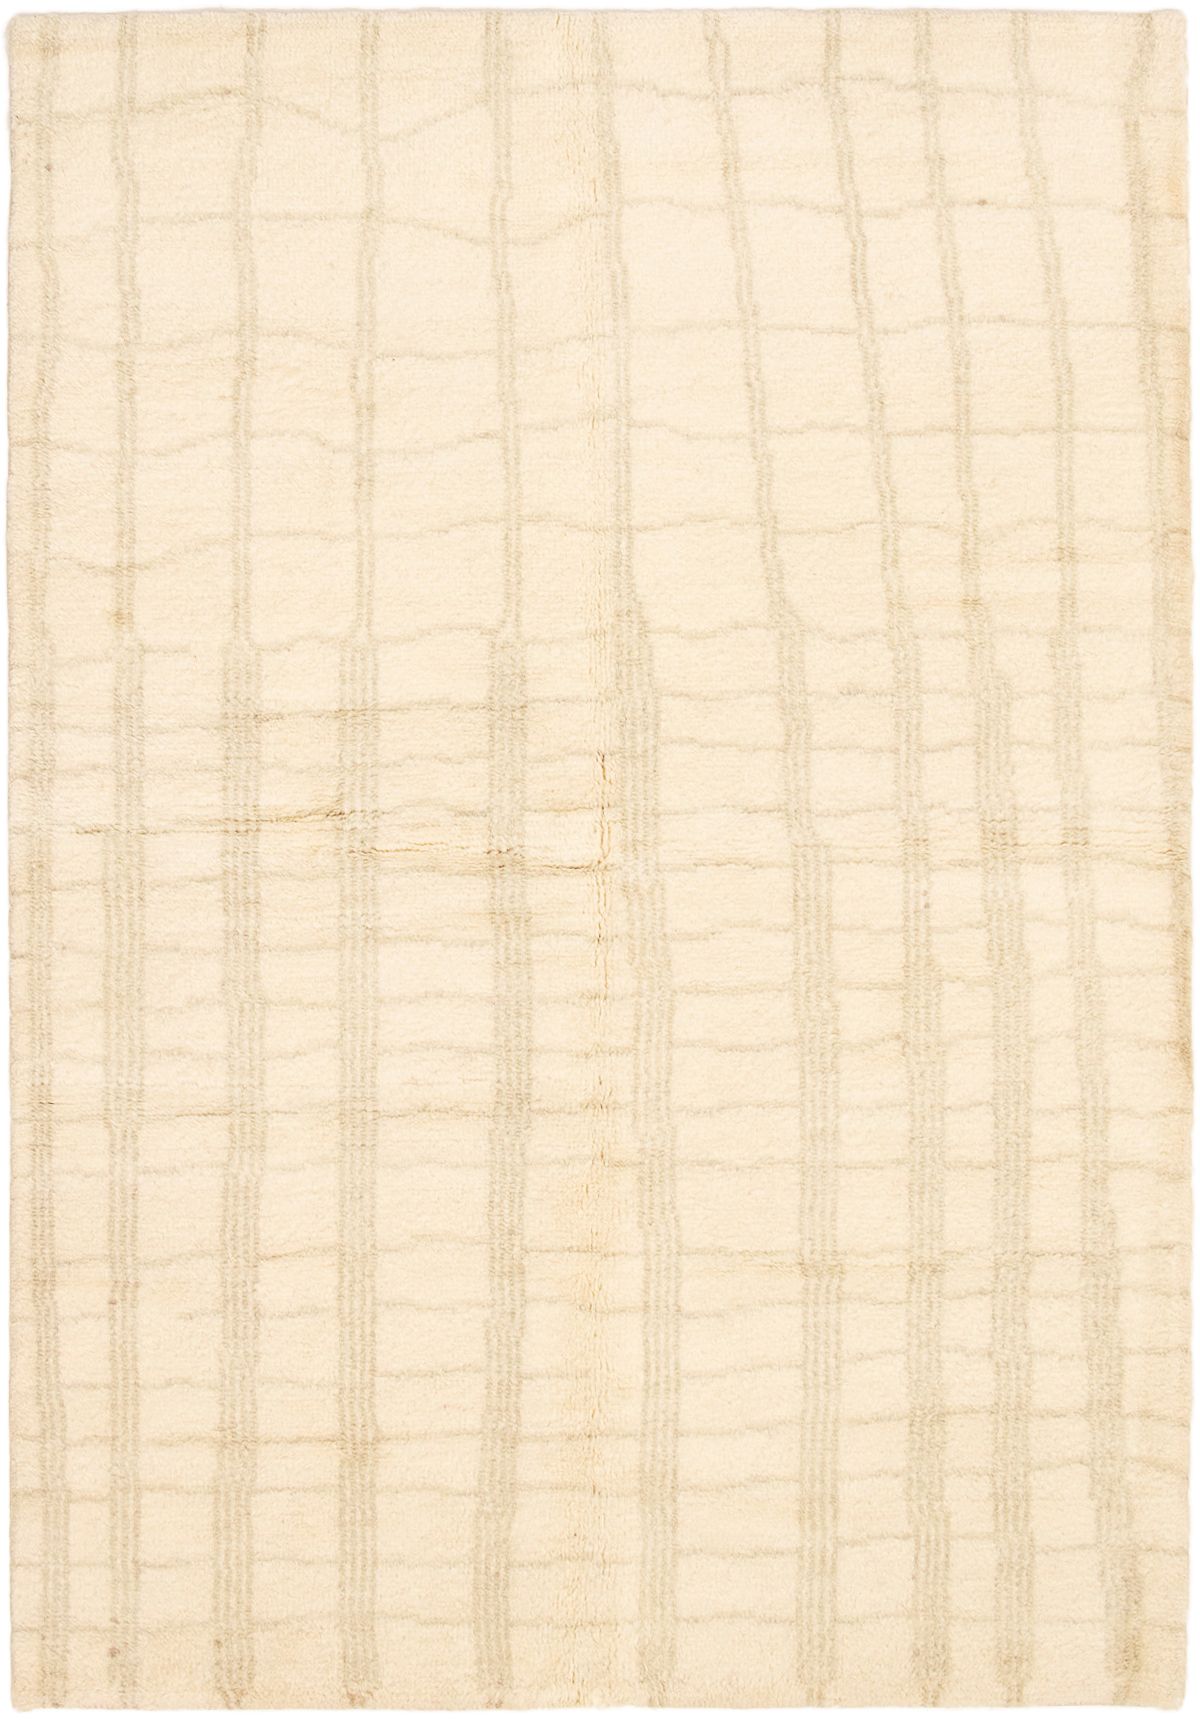 Hand-knotted Arlequin Ivory, Light Khaki Wool Rug 6'1" x 9'1" Size: 6'1" x 9'1"  